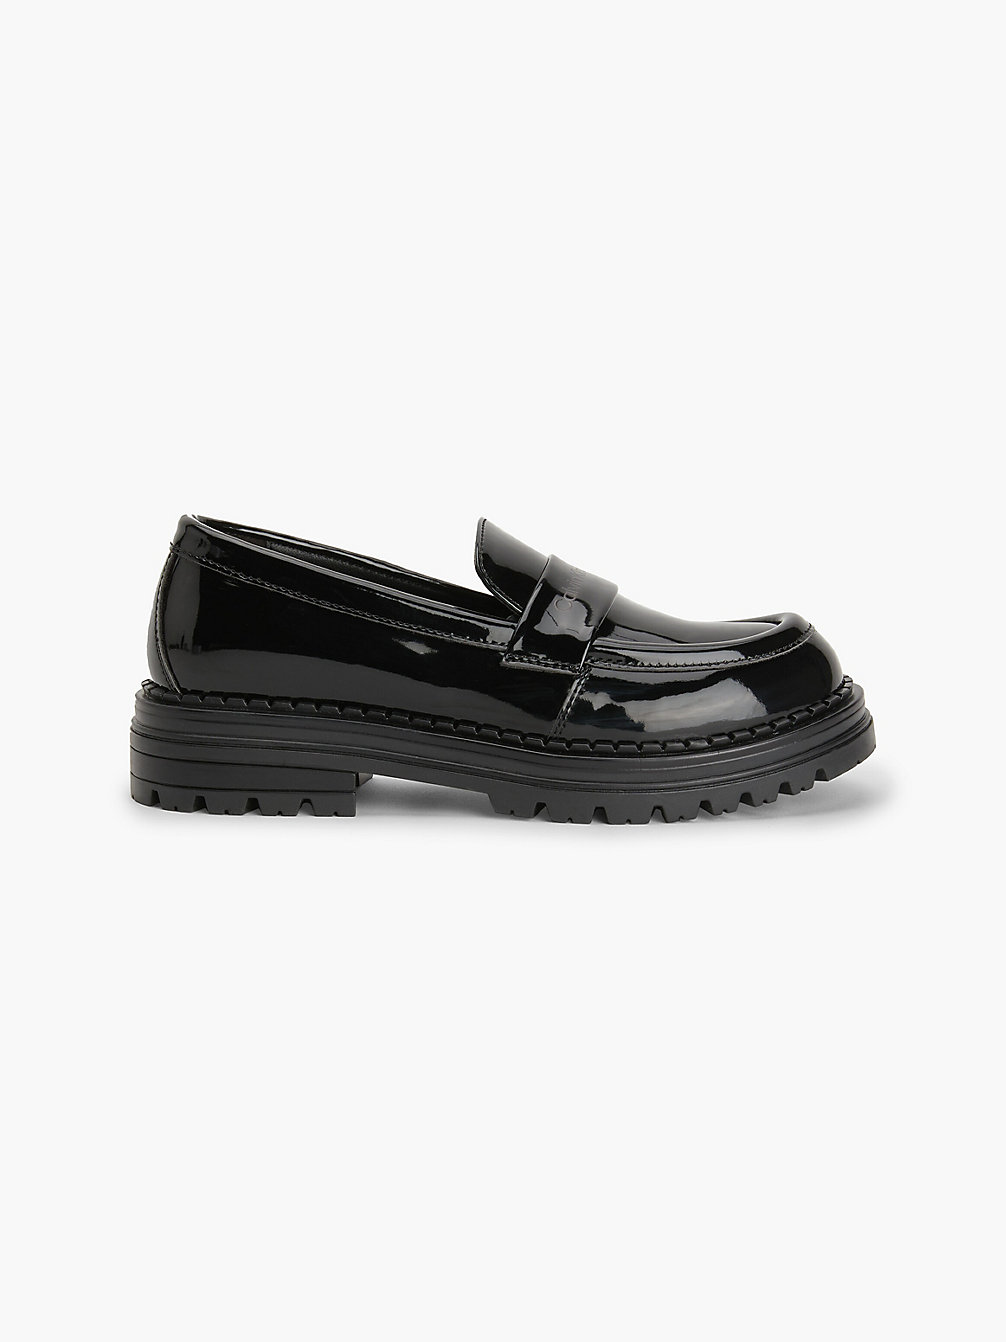 BLACK Faux Patent Leather Kids Loafers undefined kids unisex Calvin Klein